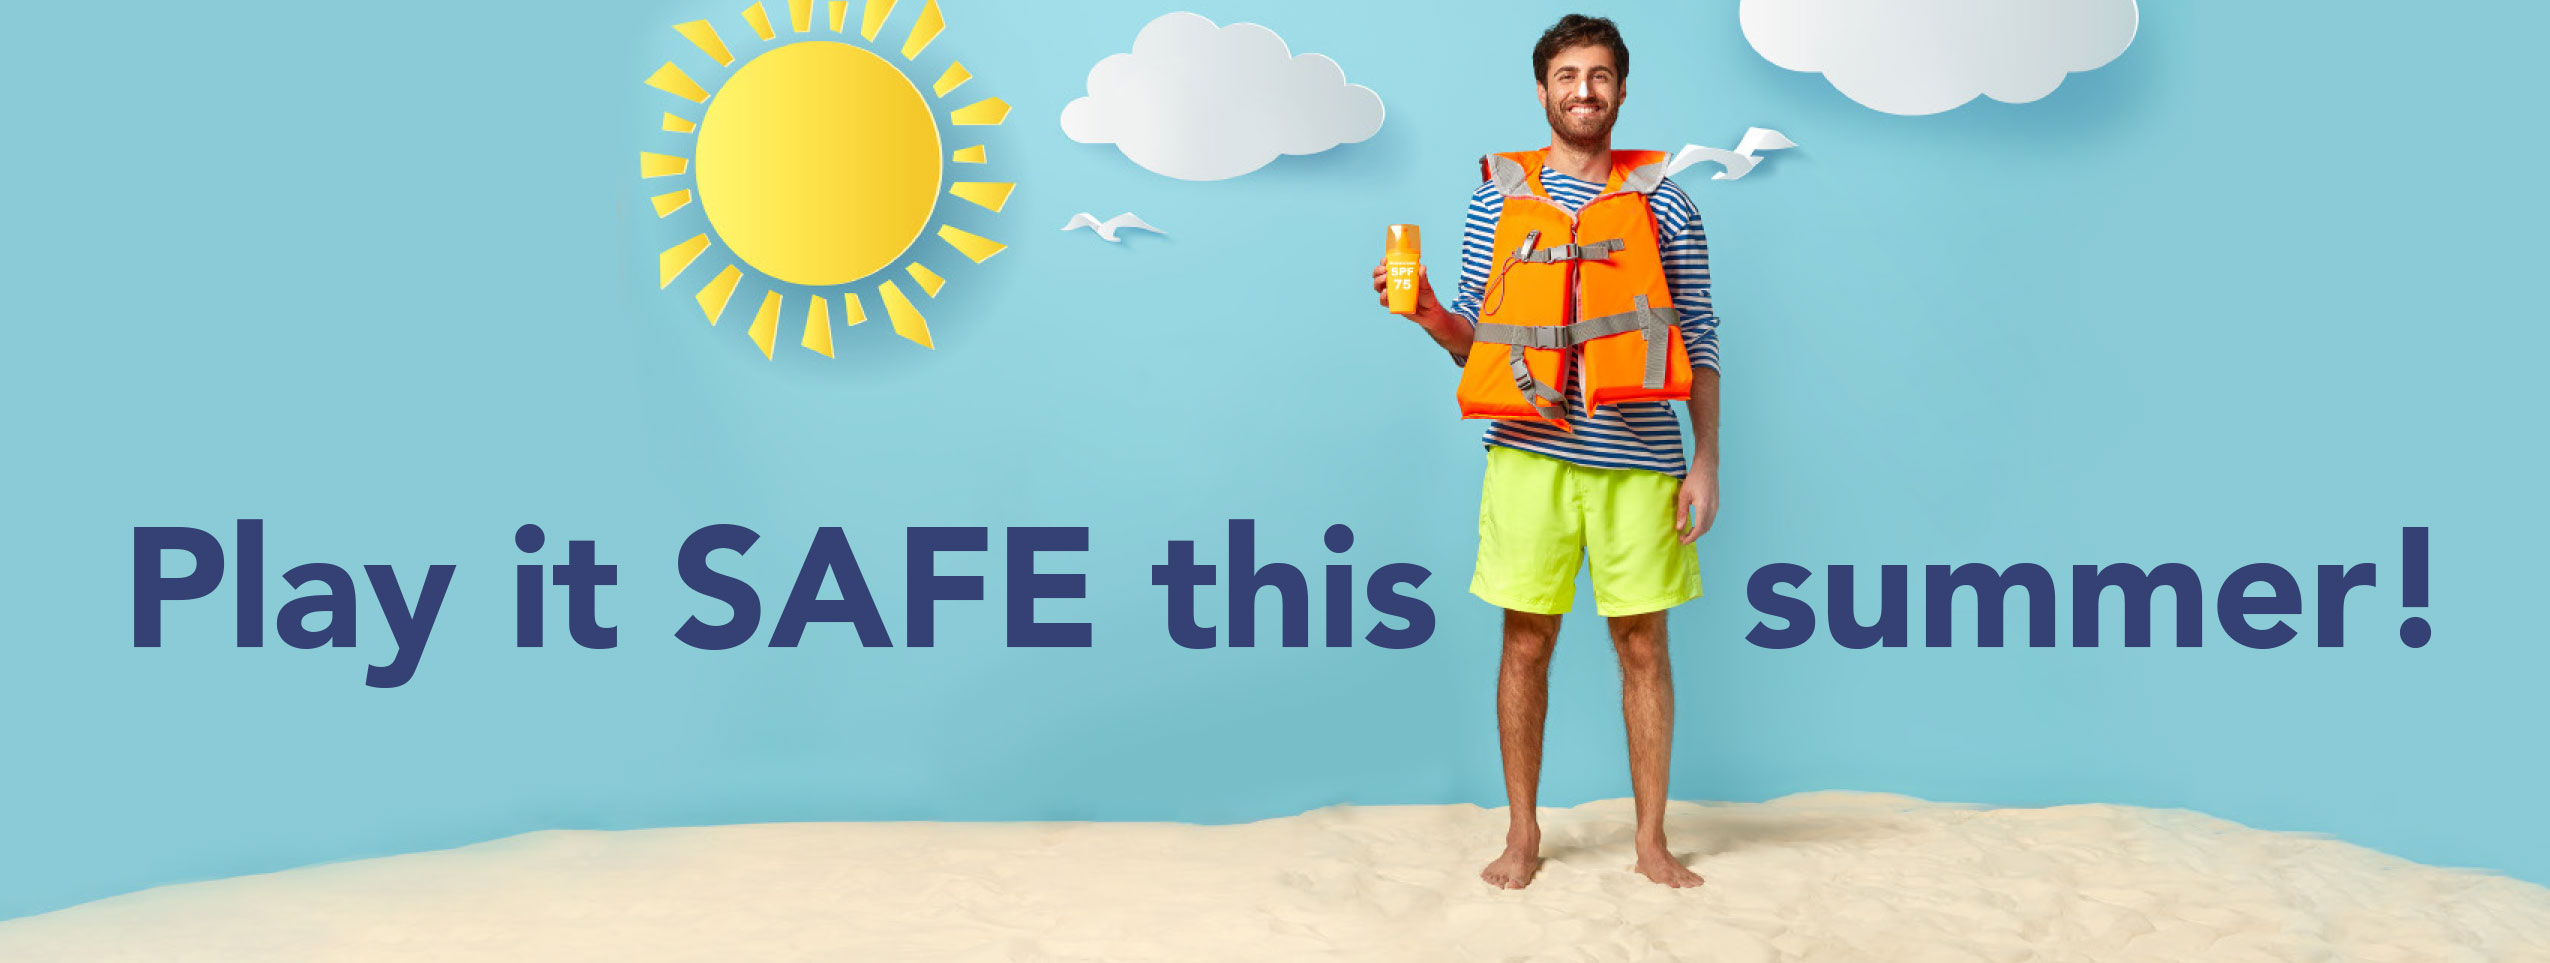 Play it safe this summer